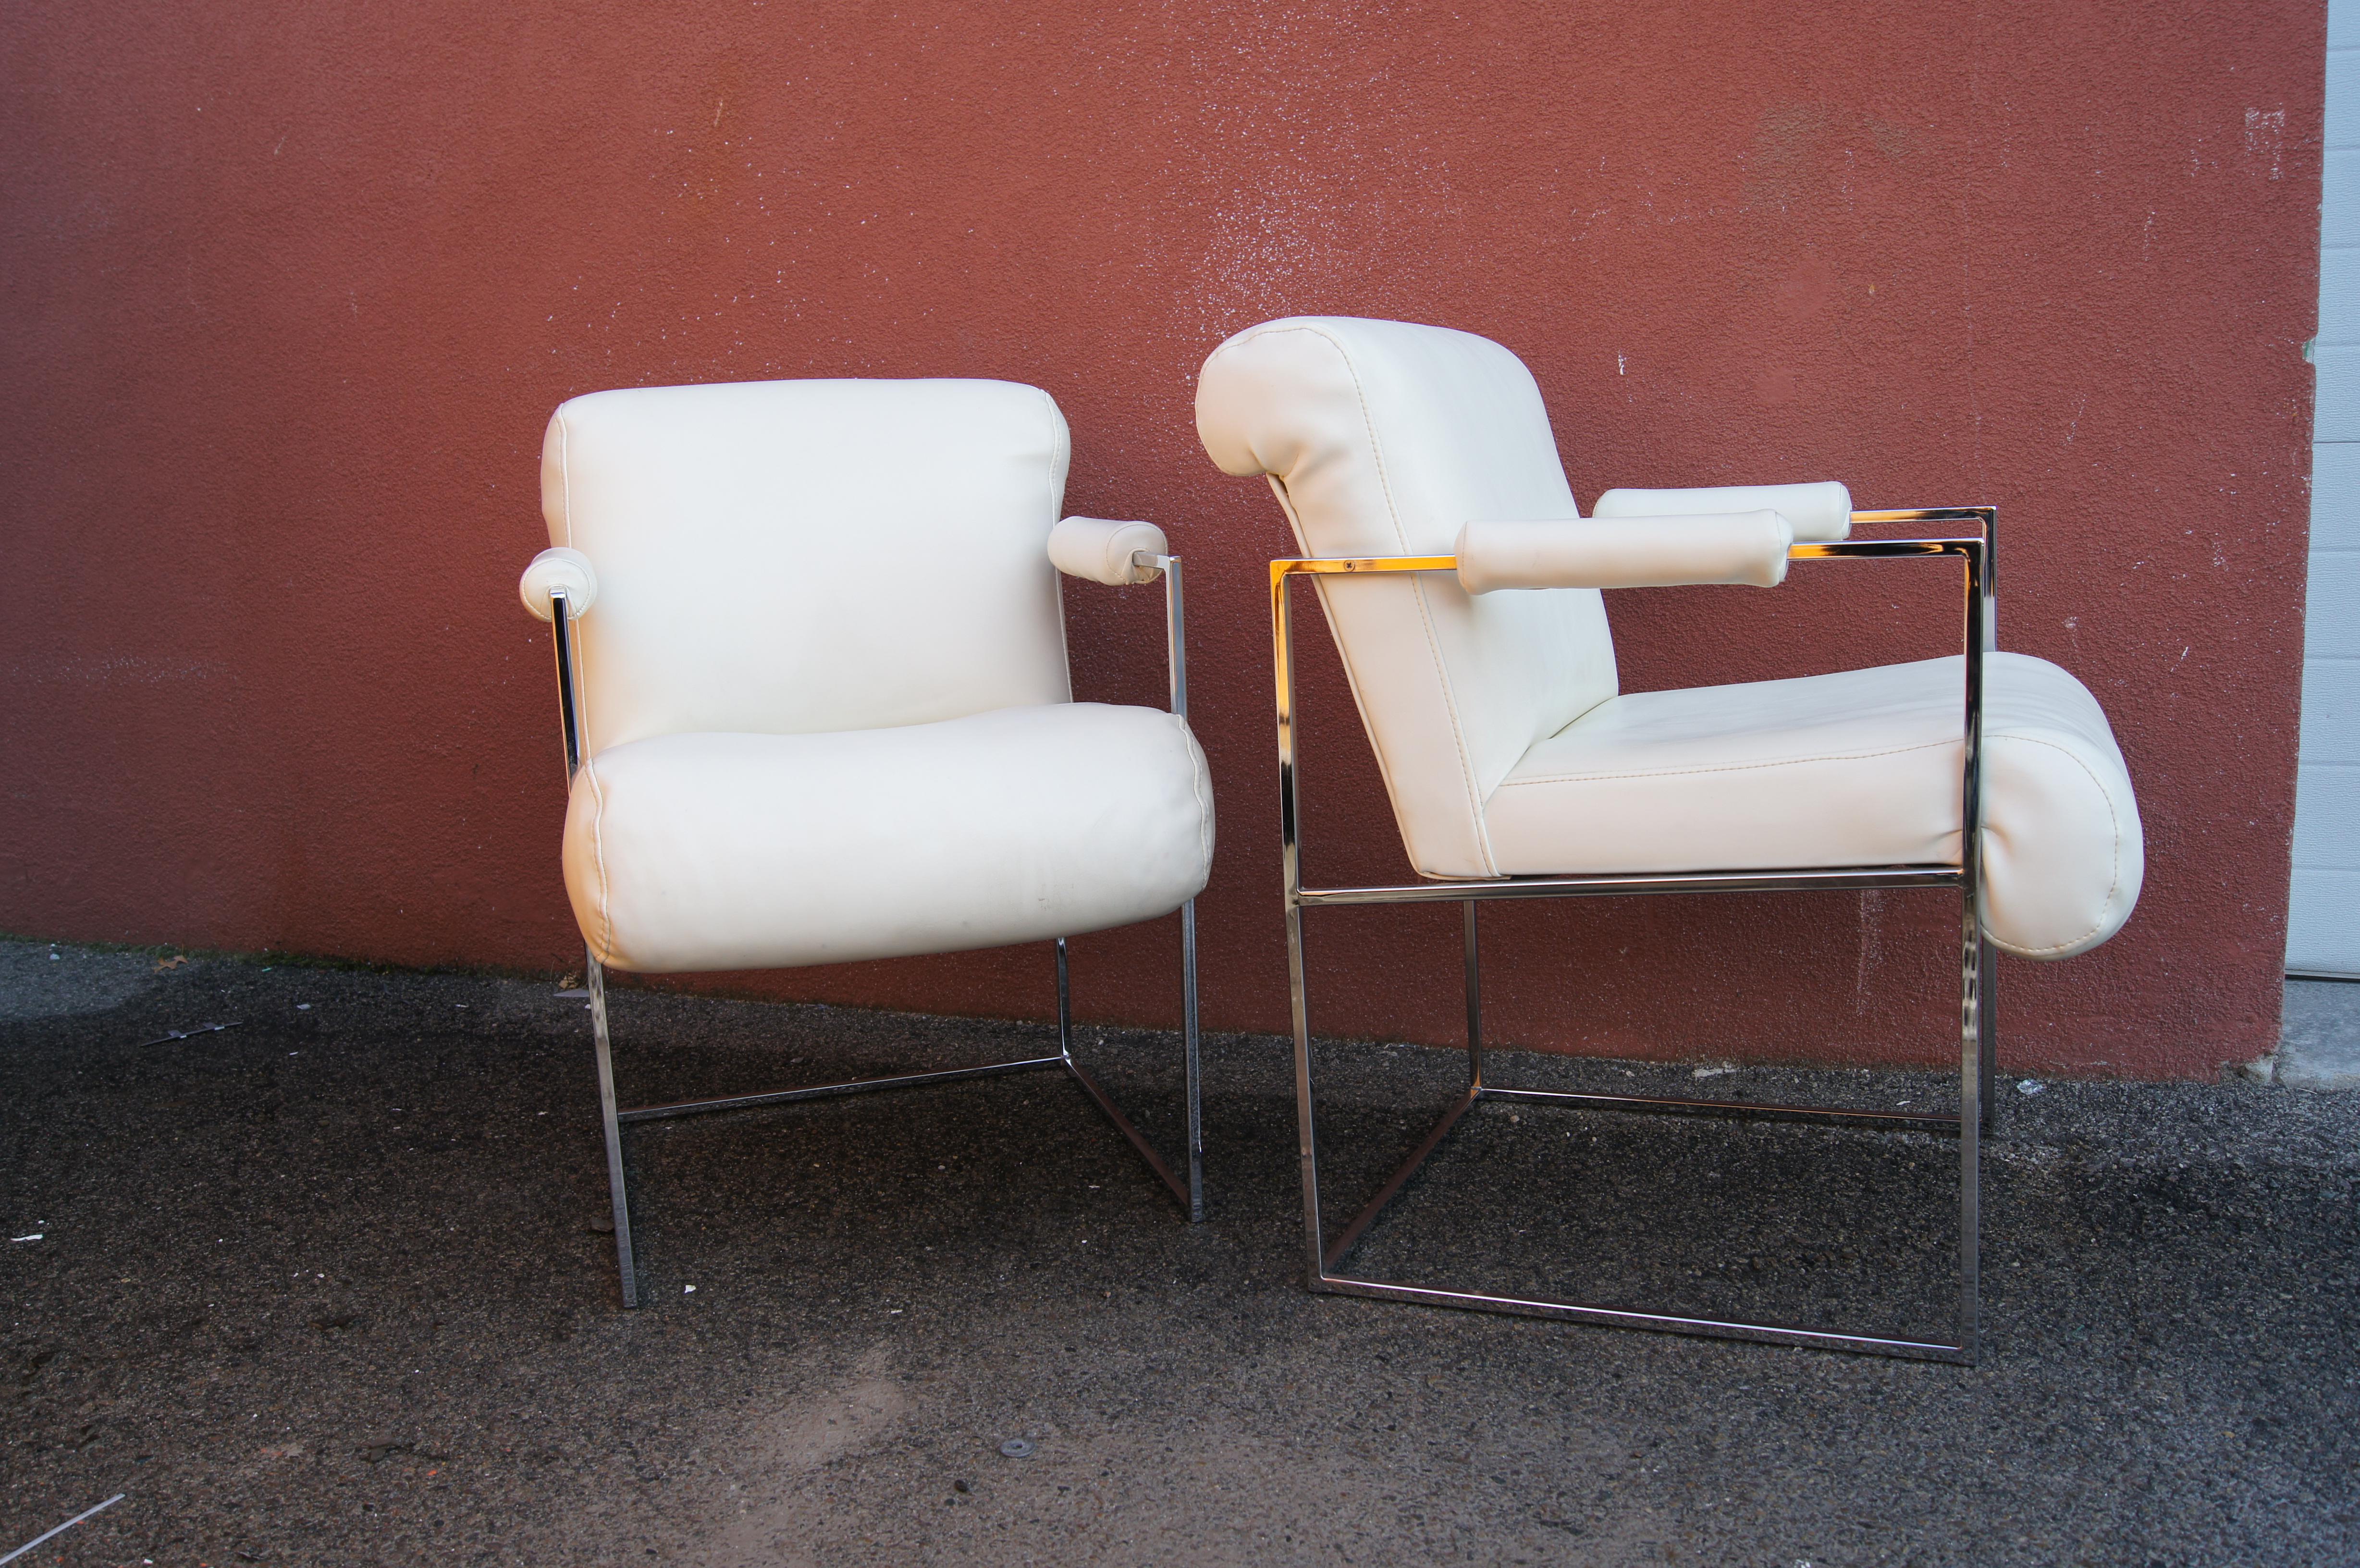 Designed by Milo Baughman as part of the Thin Line Collection for Thayer Coggin, this striking pair of armchairs features thin rectangular frames in chrome with cylindrical padded armrests. The vinyl-upholstered seats slant slightly for added